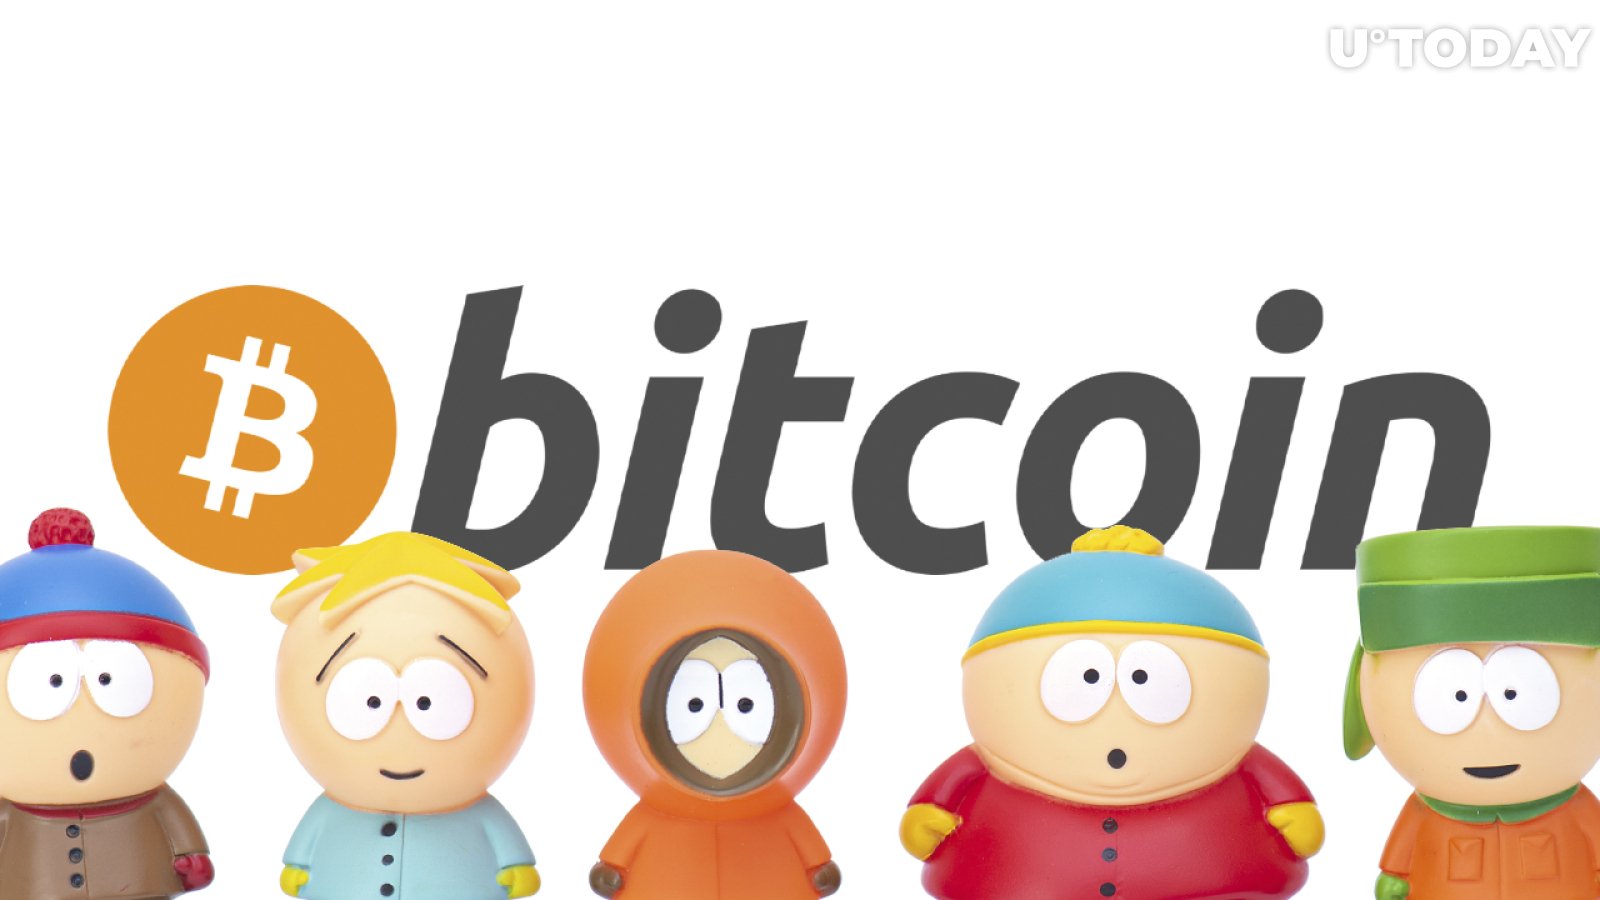 South Park Makes Fun of Bitcoin in Most Recent Episode